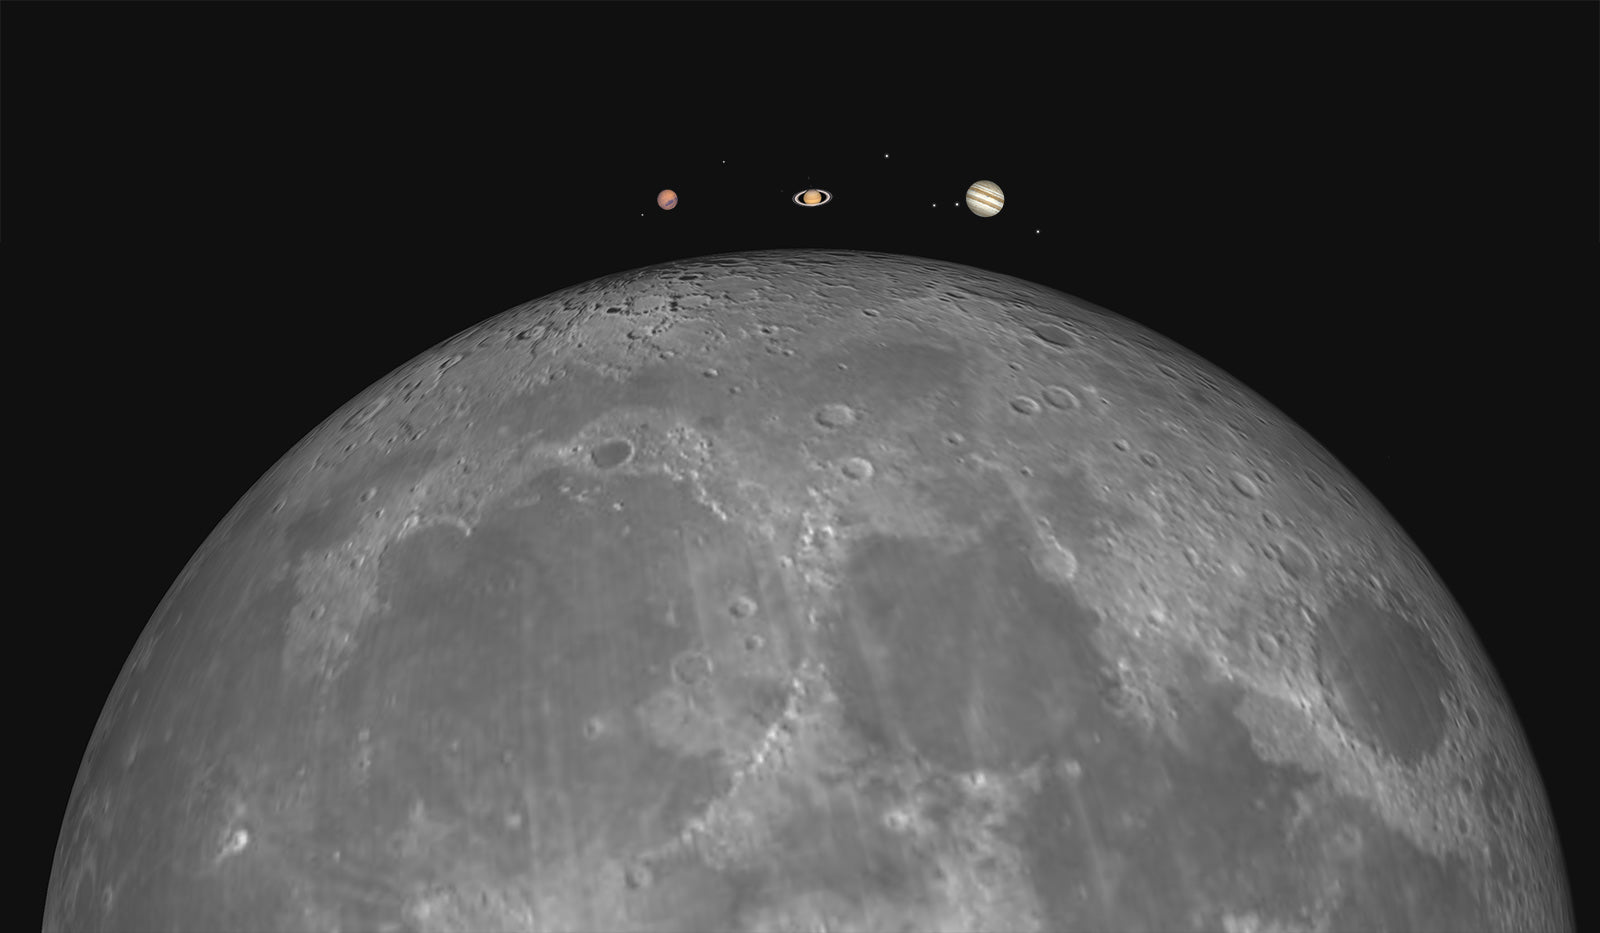 Mars, Saturn, and Jupiter relative sizes to the Moon when at 2018 oppositions